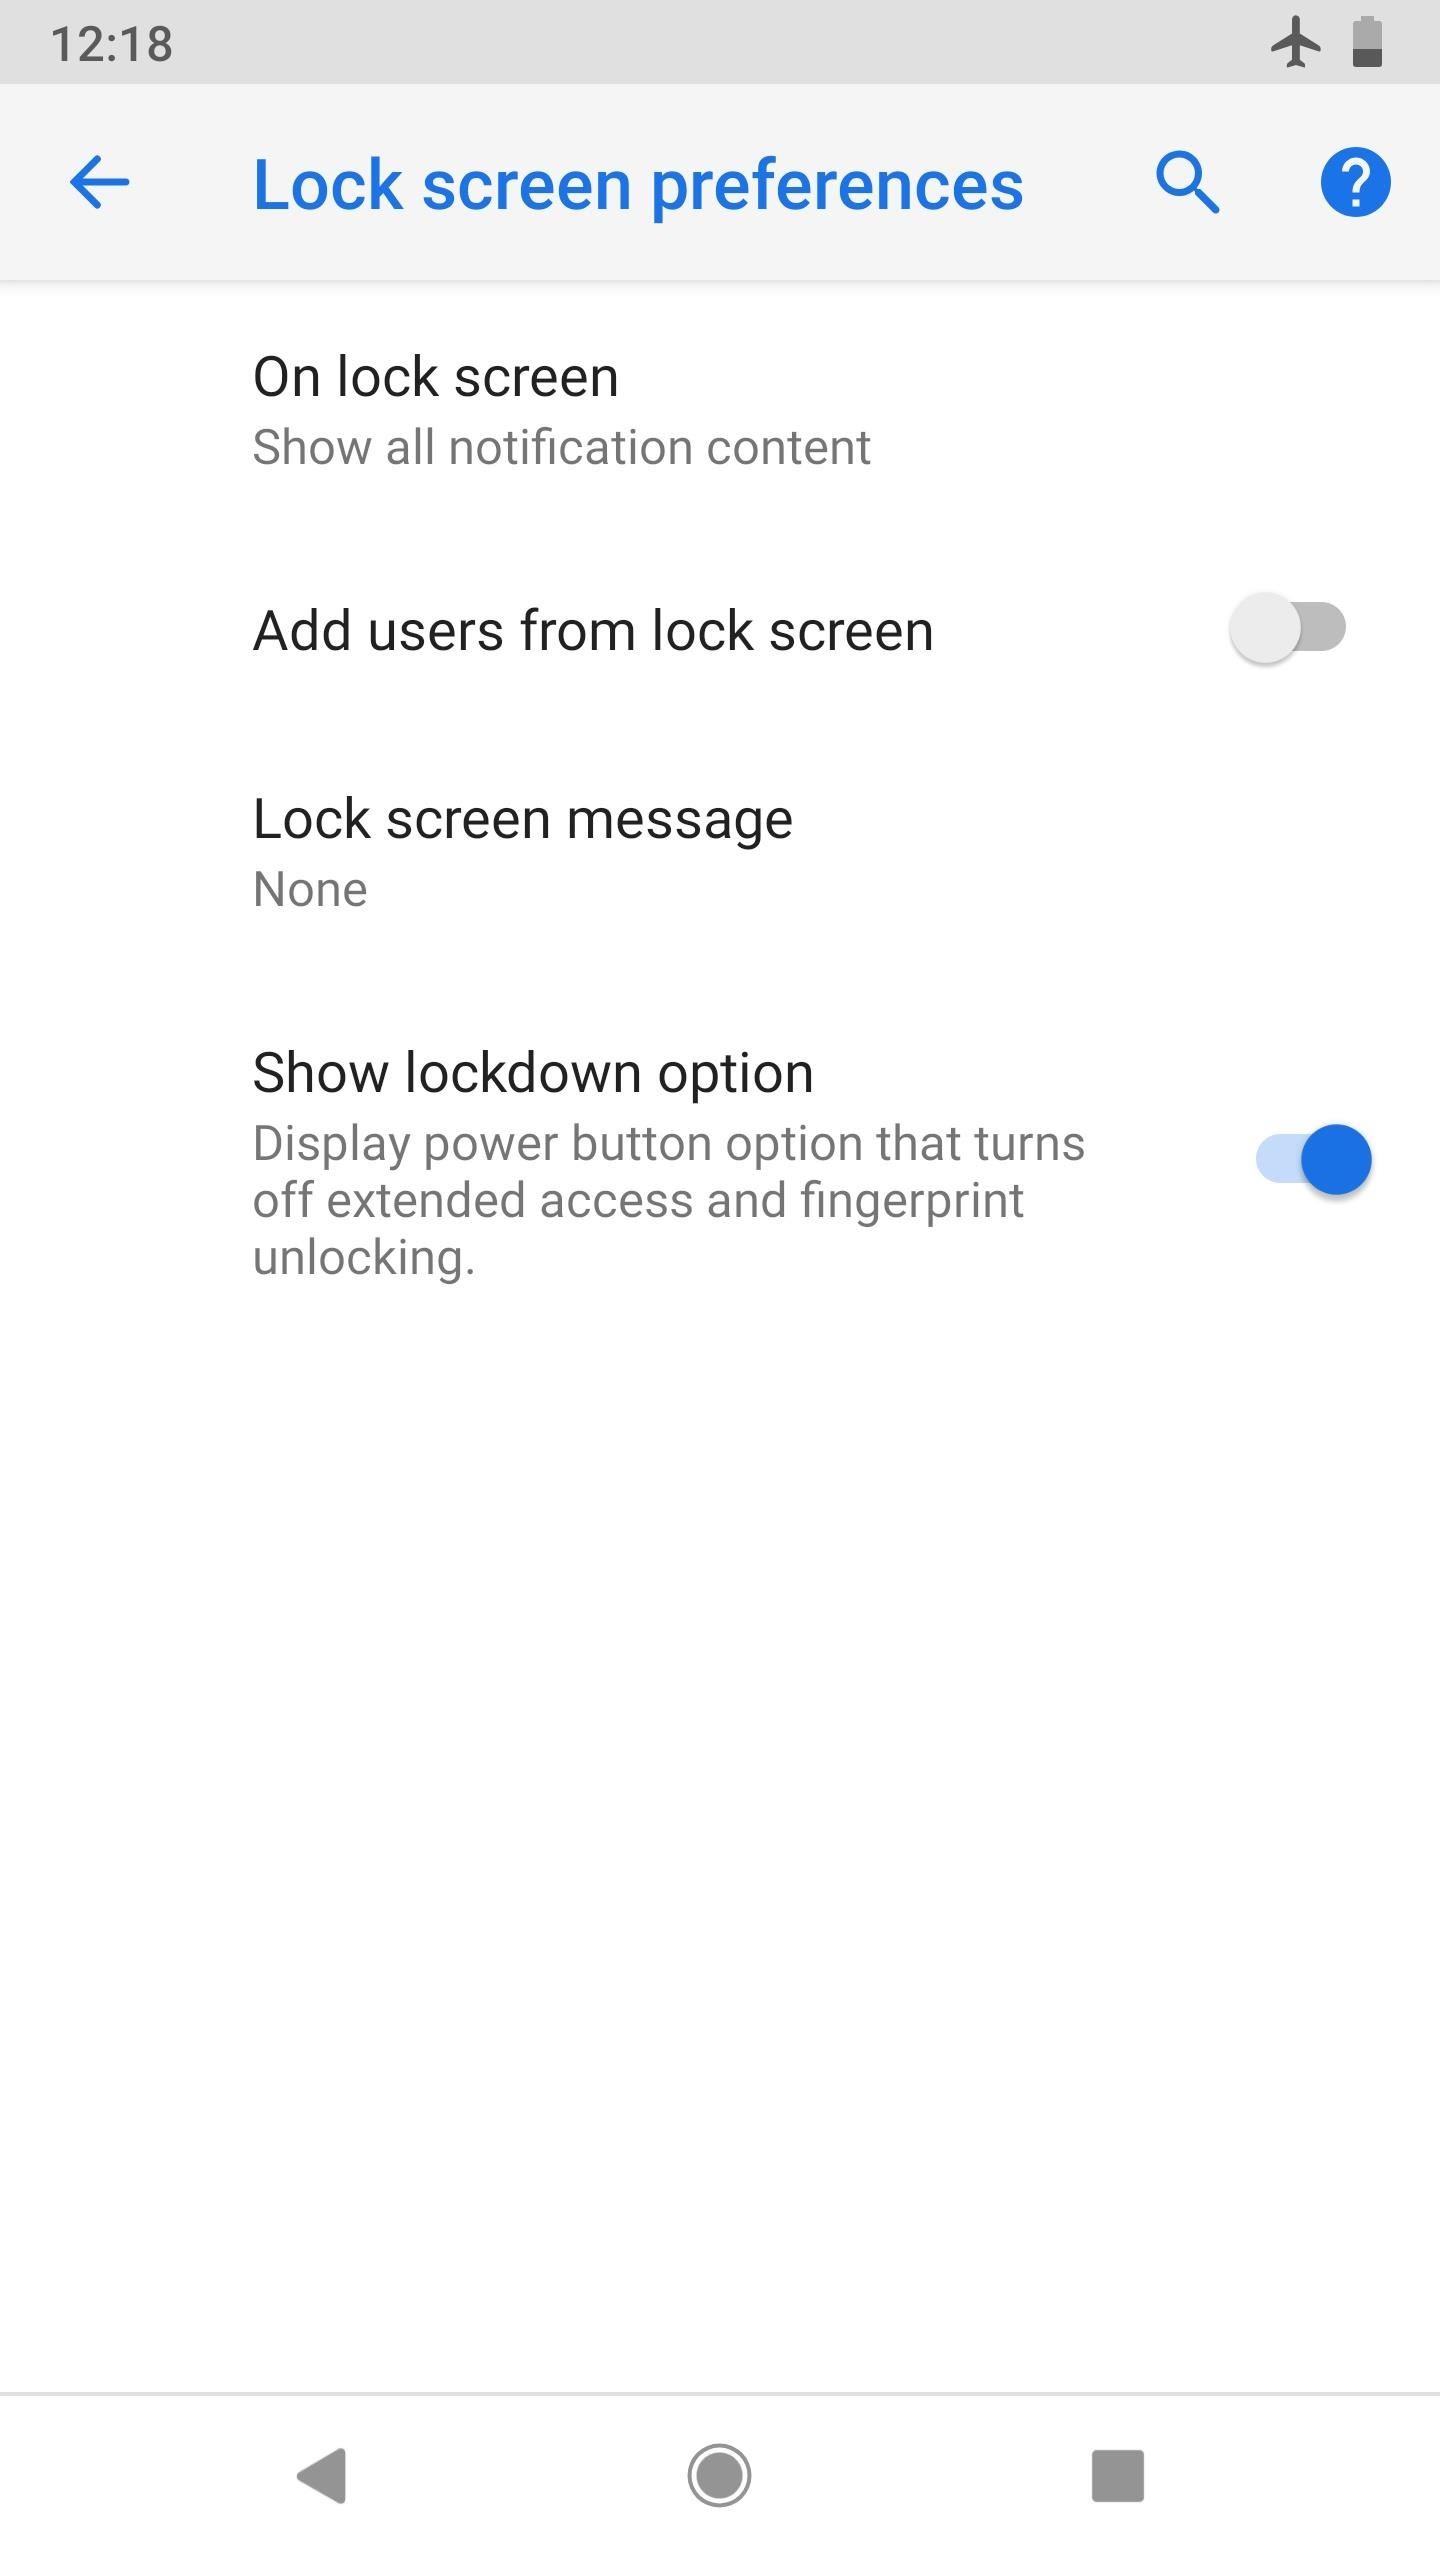 12 Important Privacy & Security Features Google Added to Android 9.0 Pie